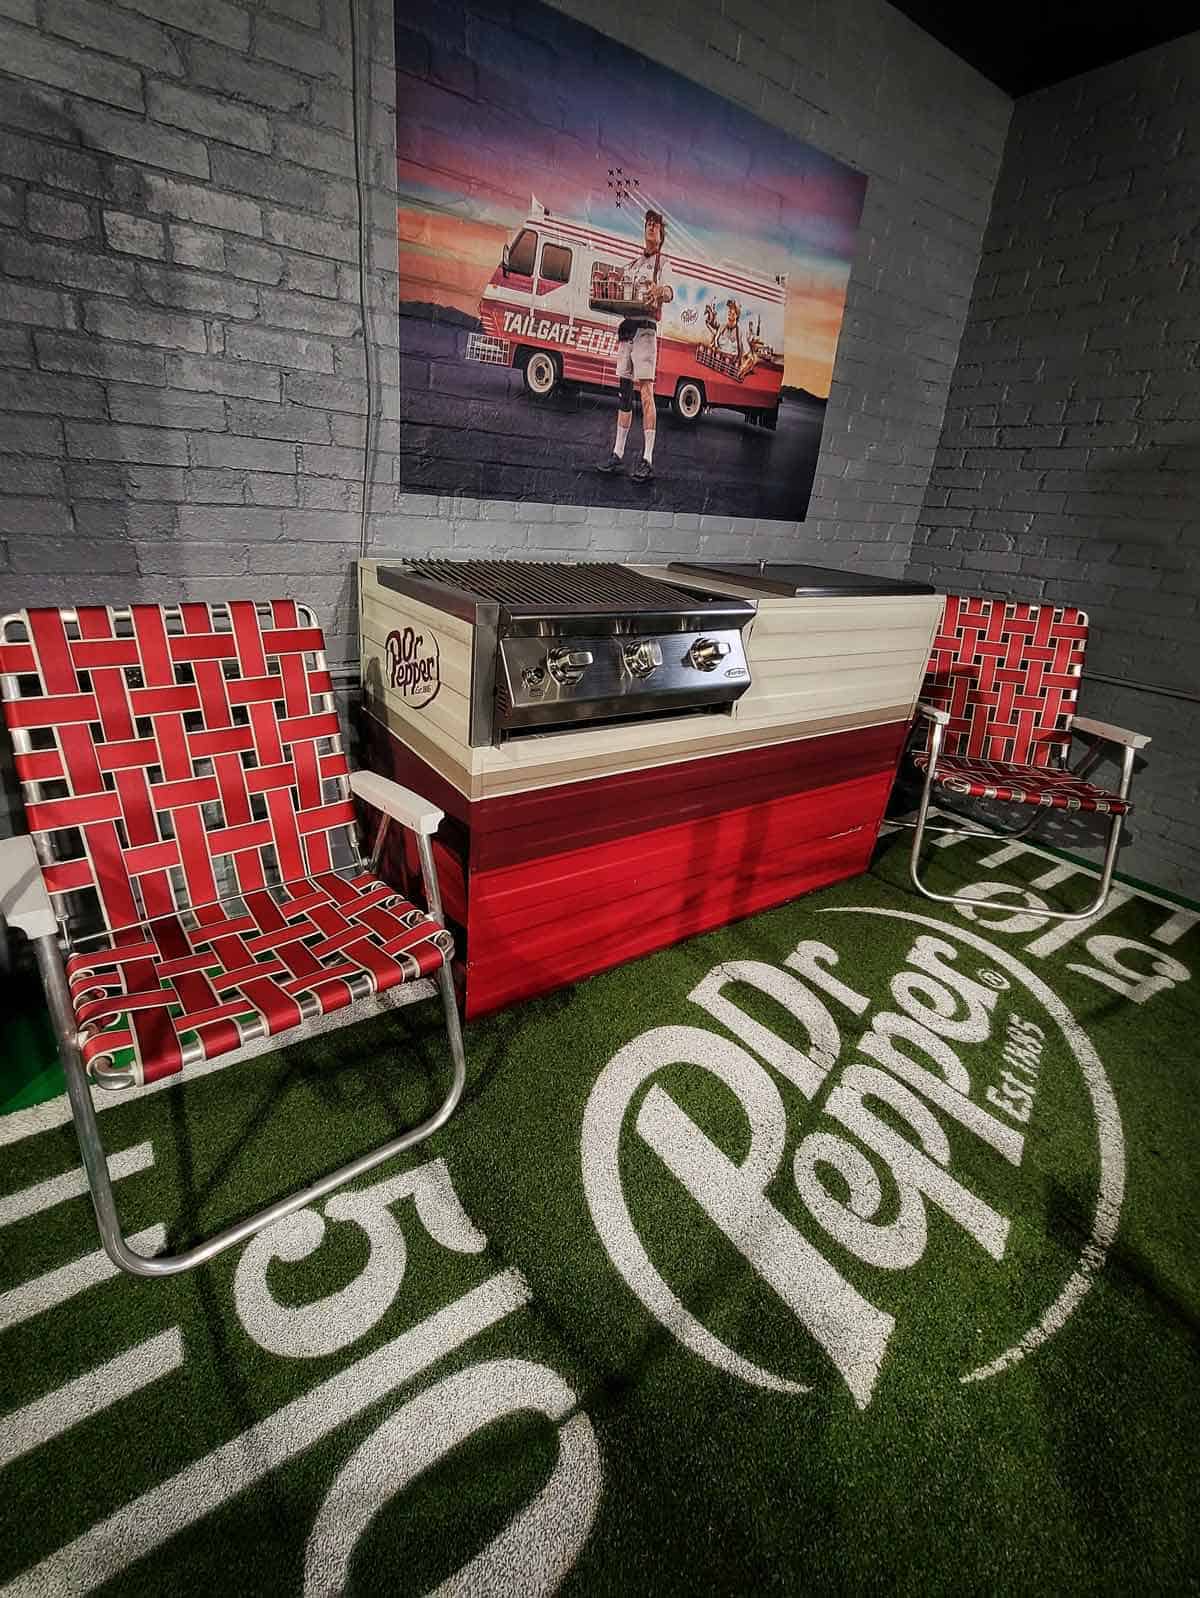 One of the displays at Dr. Pepper World Museum showing vintage poster, lawn chairs, and outside grill.